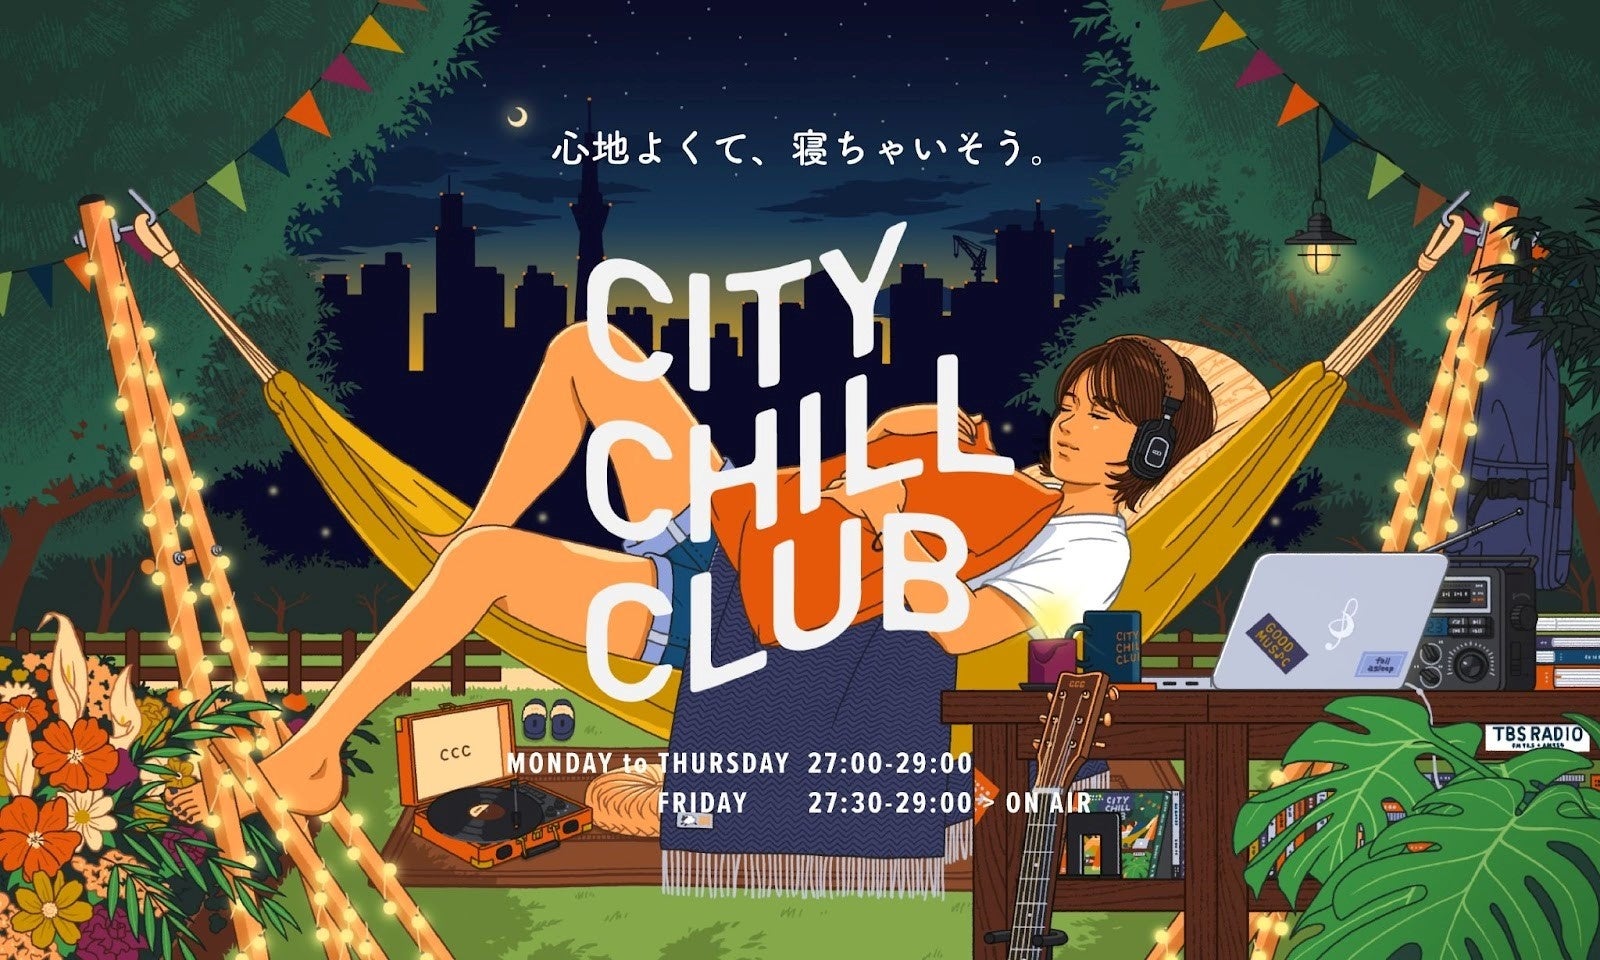 『CITY CHILL CLUB』番組初ライブイベント『Link to_ in hmc studio organized by CITY CHILL CLUB』5/21(火)チケット抽選受付開始！